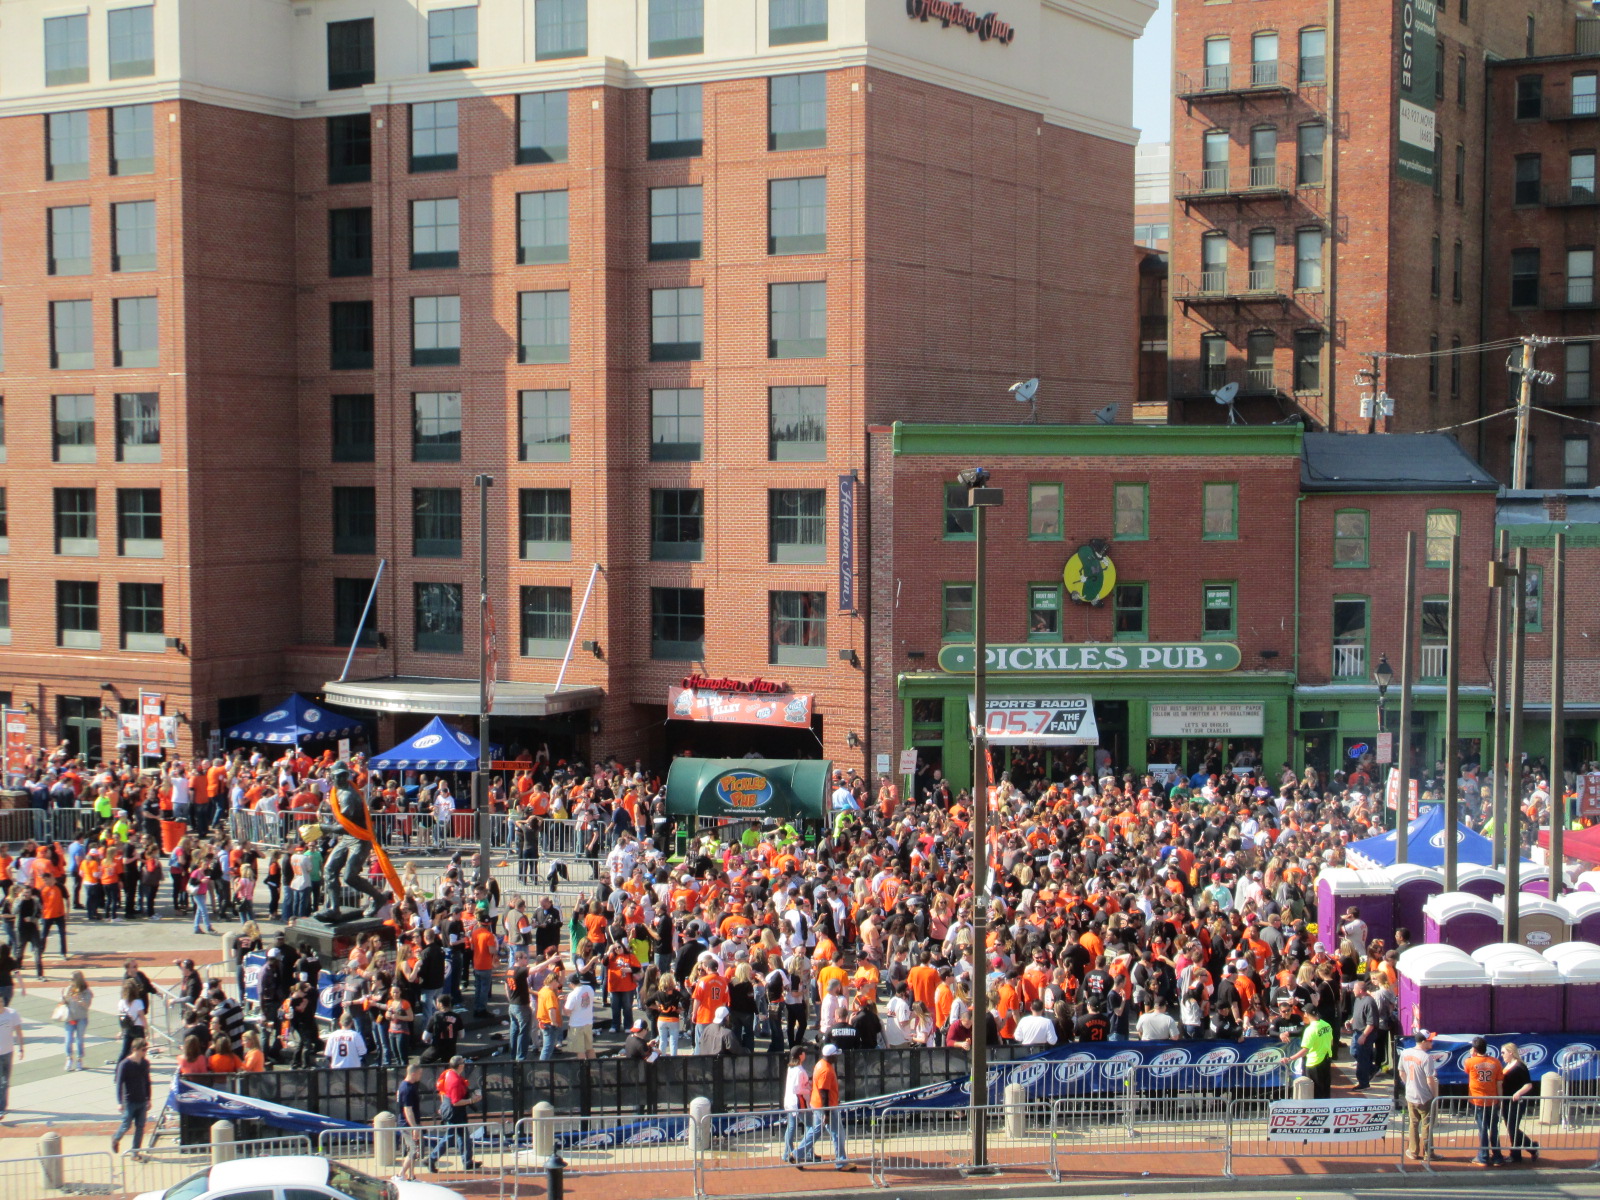 Photo of Baltimore Orioles fans outside of Pickles Pub.